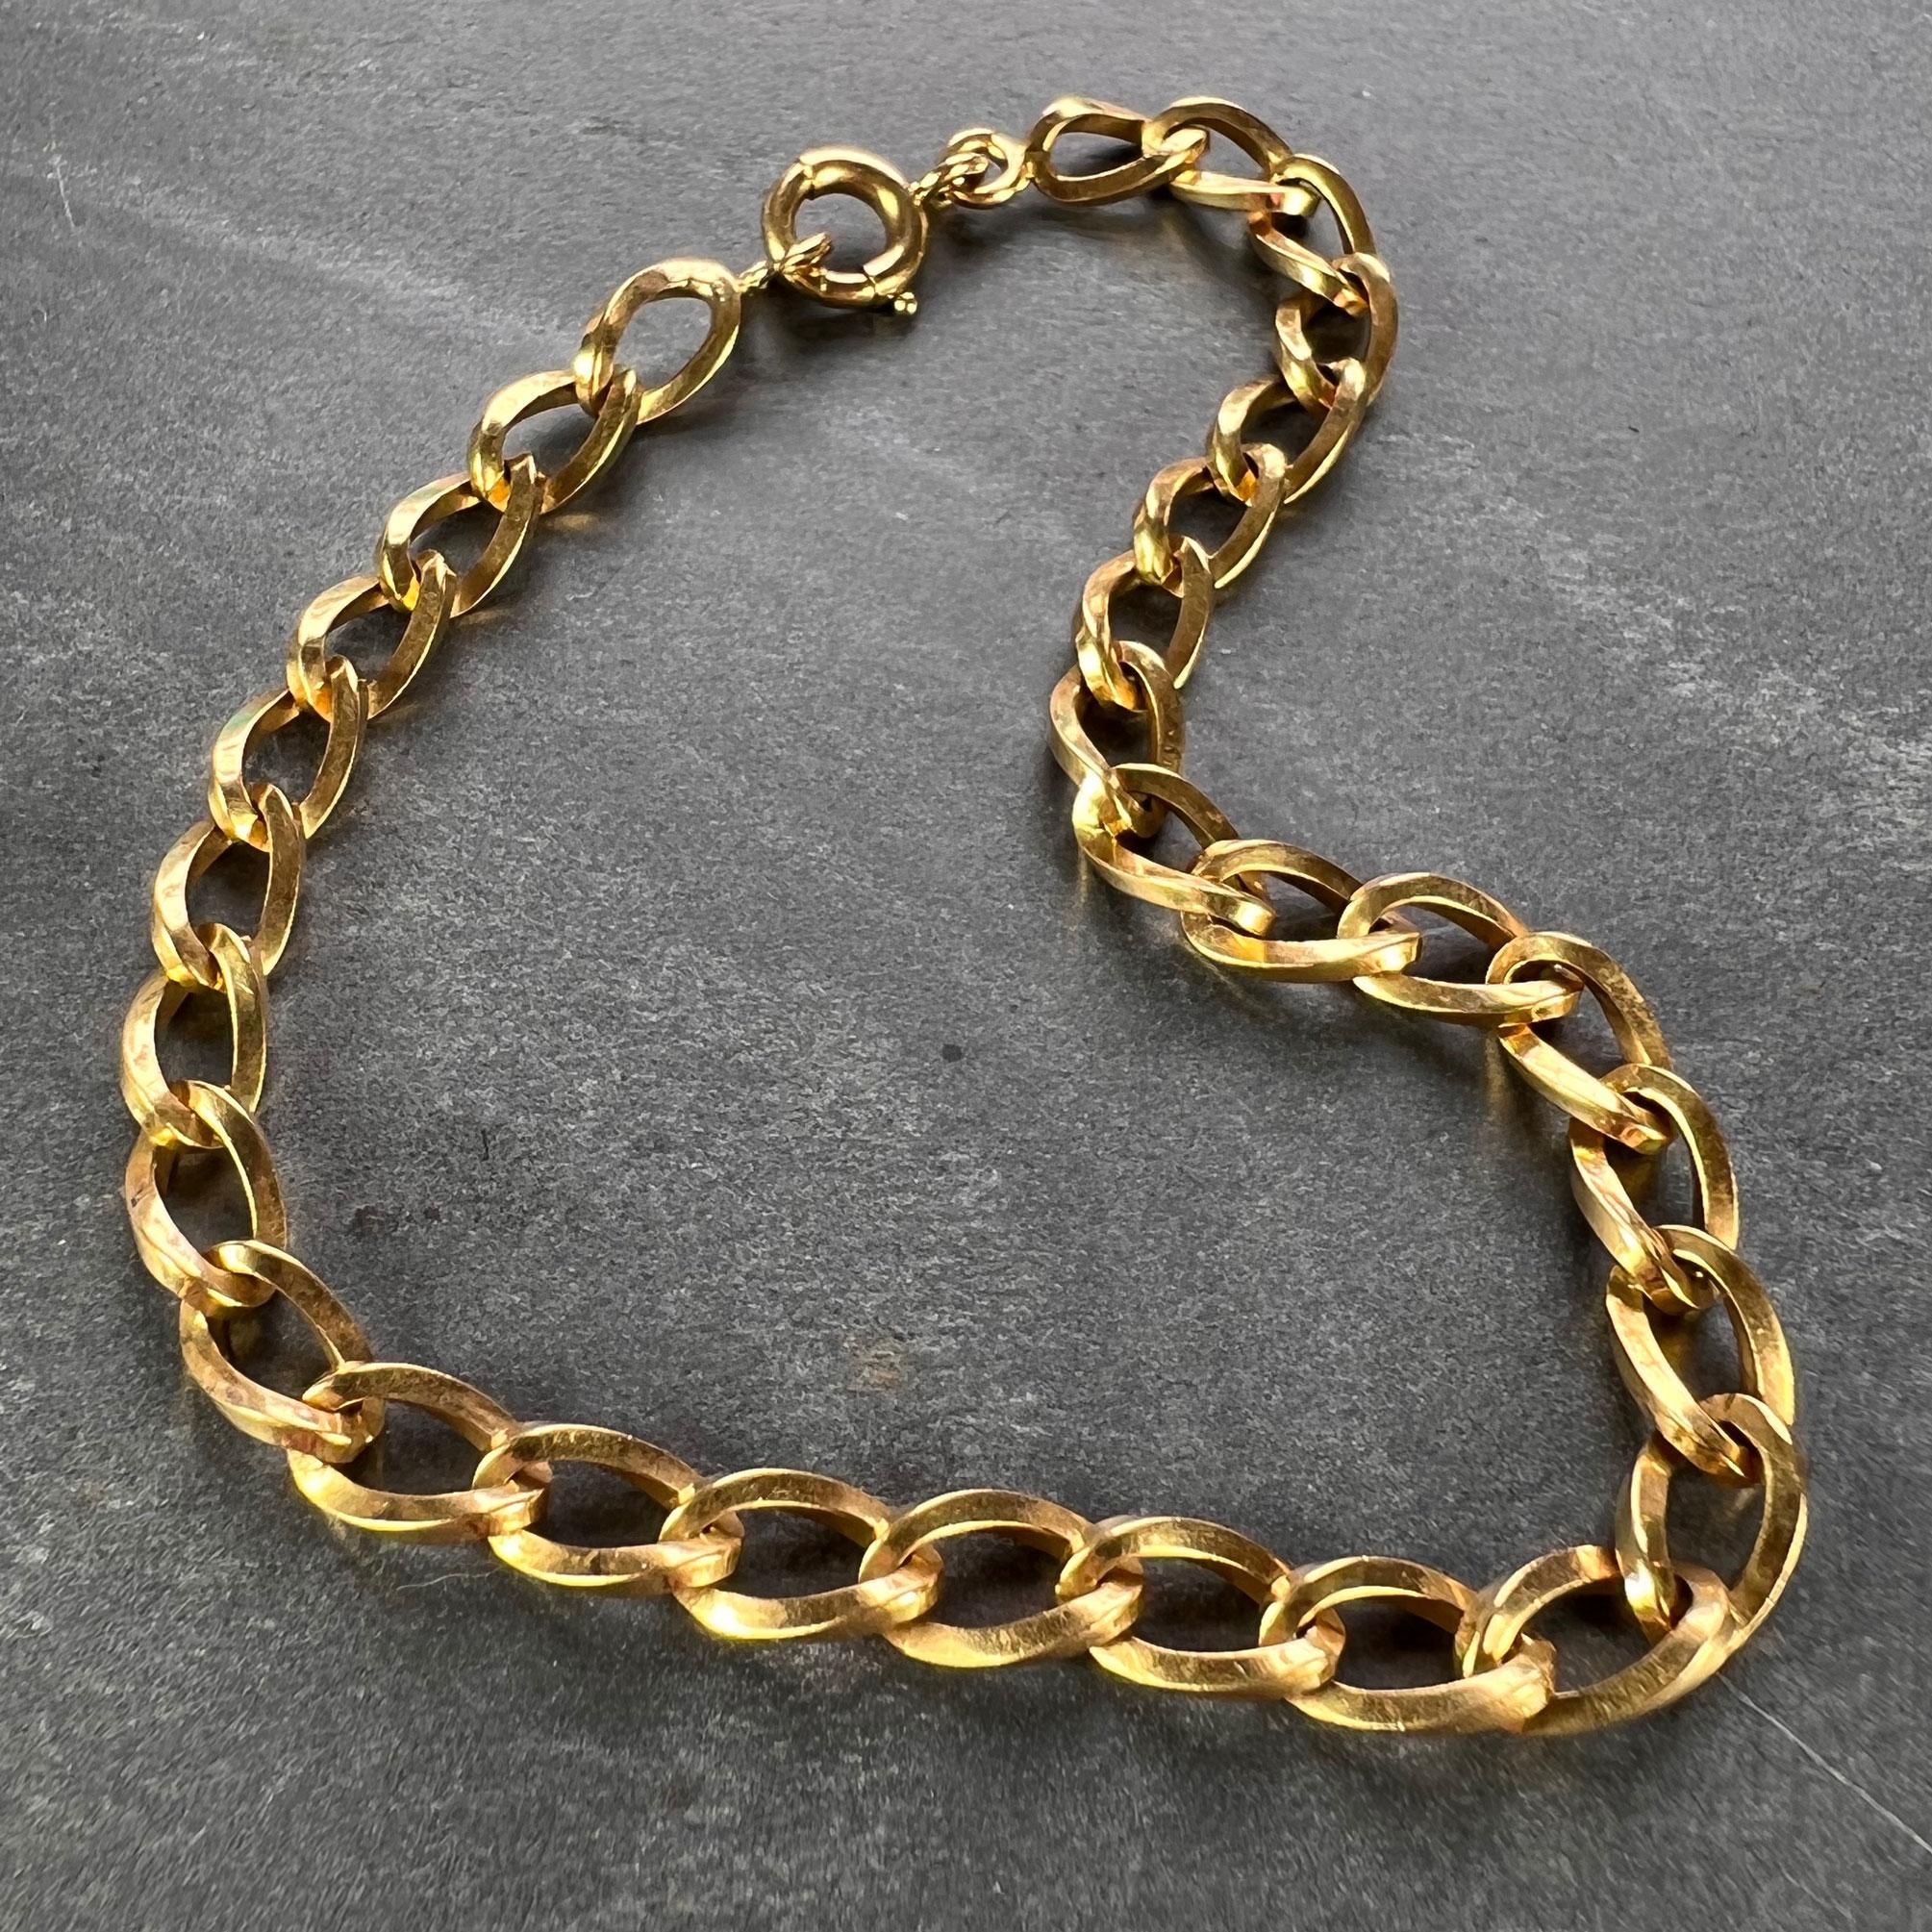 An 18 karat yellow gold curb link bracelet with squared twisted links and a spring ring clasp. Stamped with the French import mark for 18 karat gold.

Dimensions: 19 x 0.5 cm (7.5” long)
Weight: 10.22 grams
